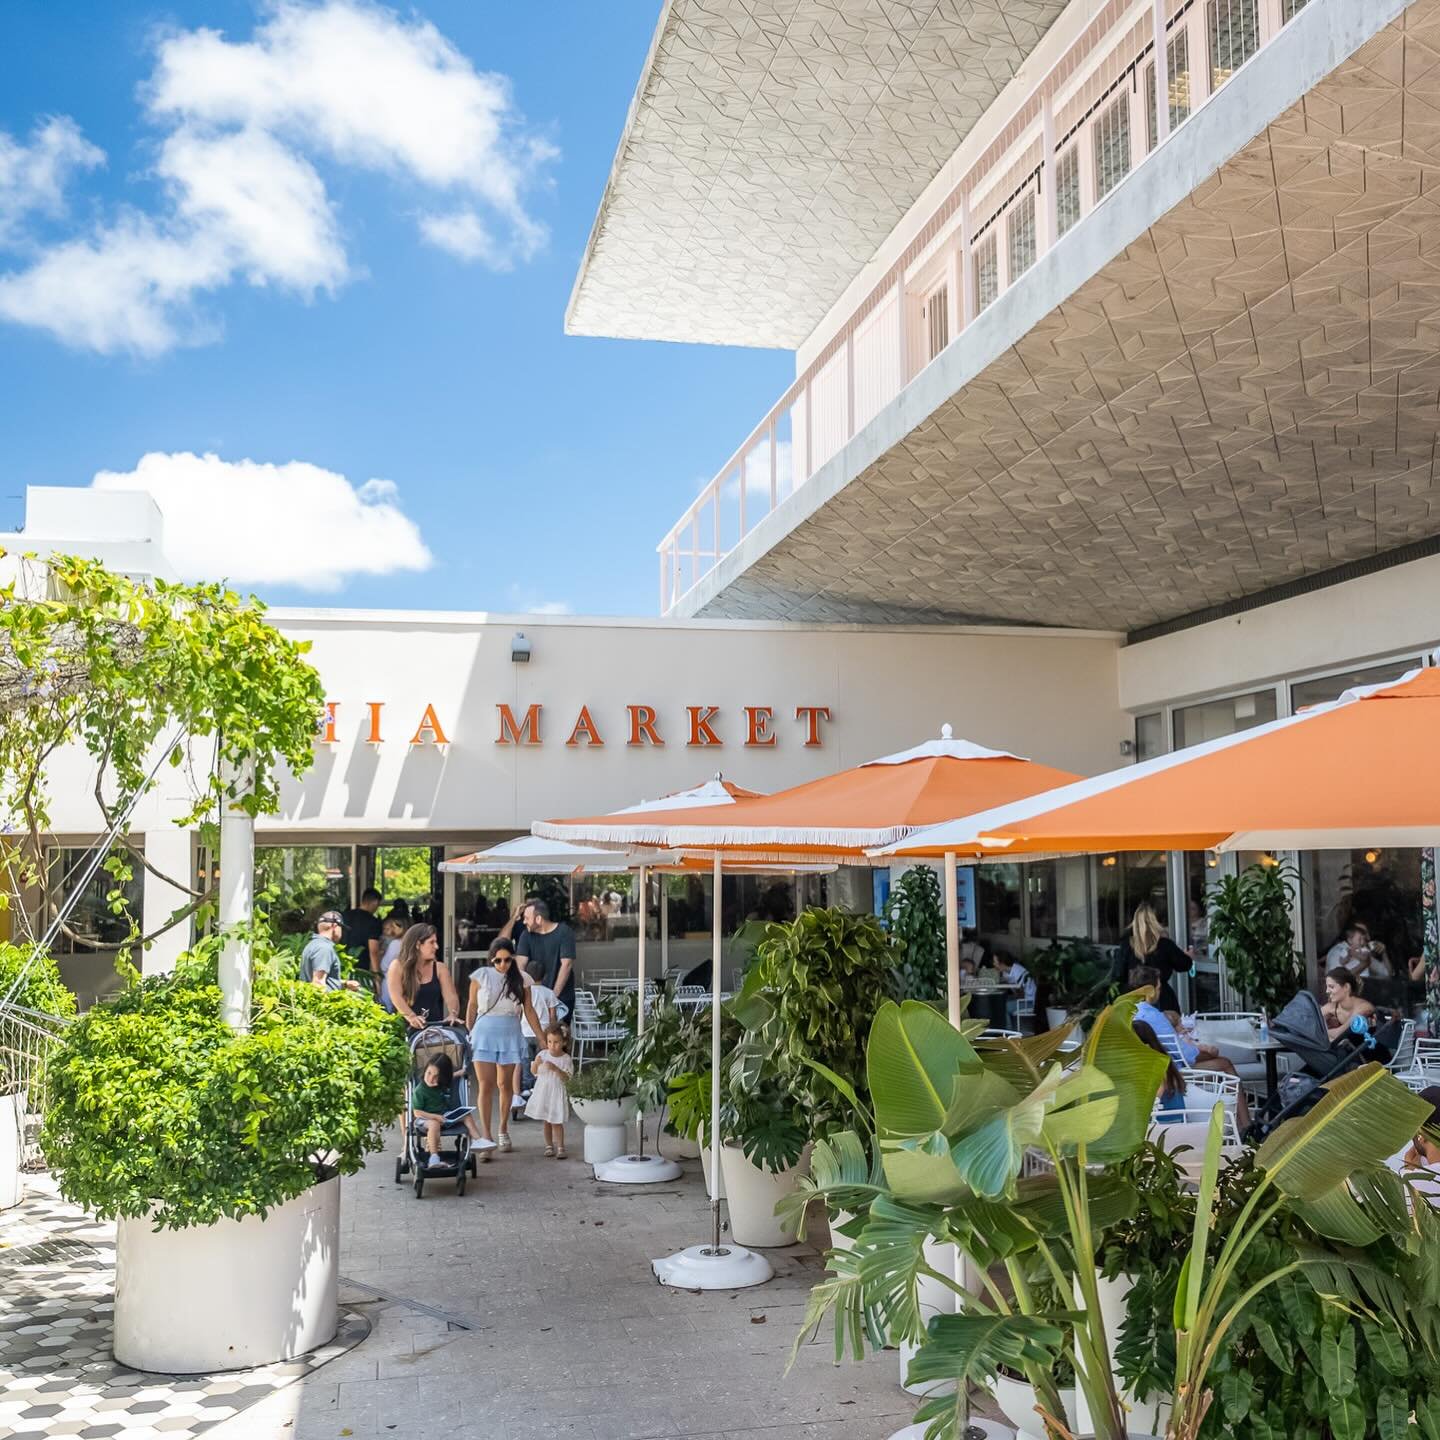 Make this Mother&rsquo;s Day unforgettable at Mia Market 🧡! Join us Sunday, May 12th, for a global culinary journey under one roof, spotlighting Miami&rsquo;s finest chefs ✨. Indulge in light bites from Atiko, sip on specialty cocktails, and craft t